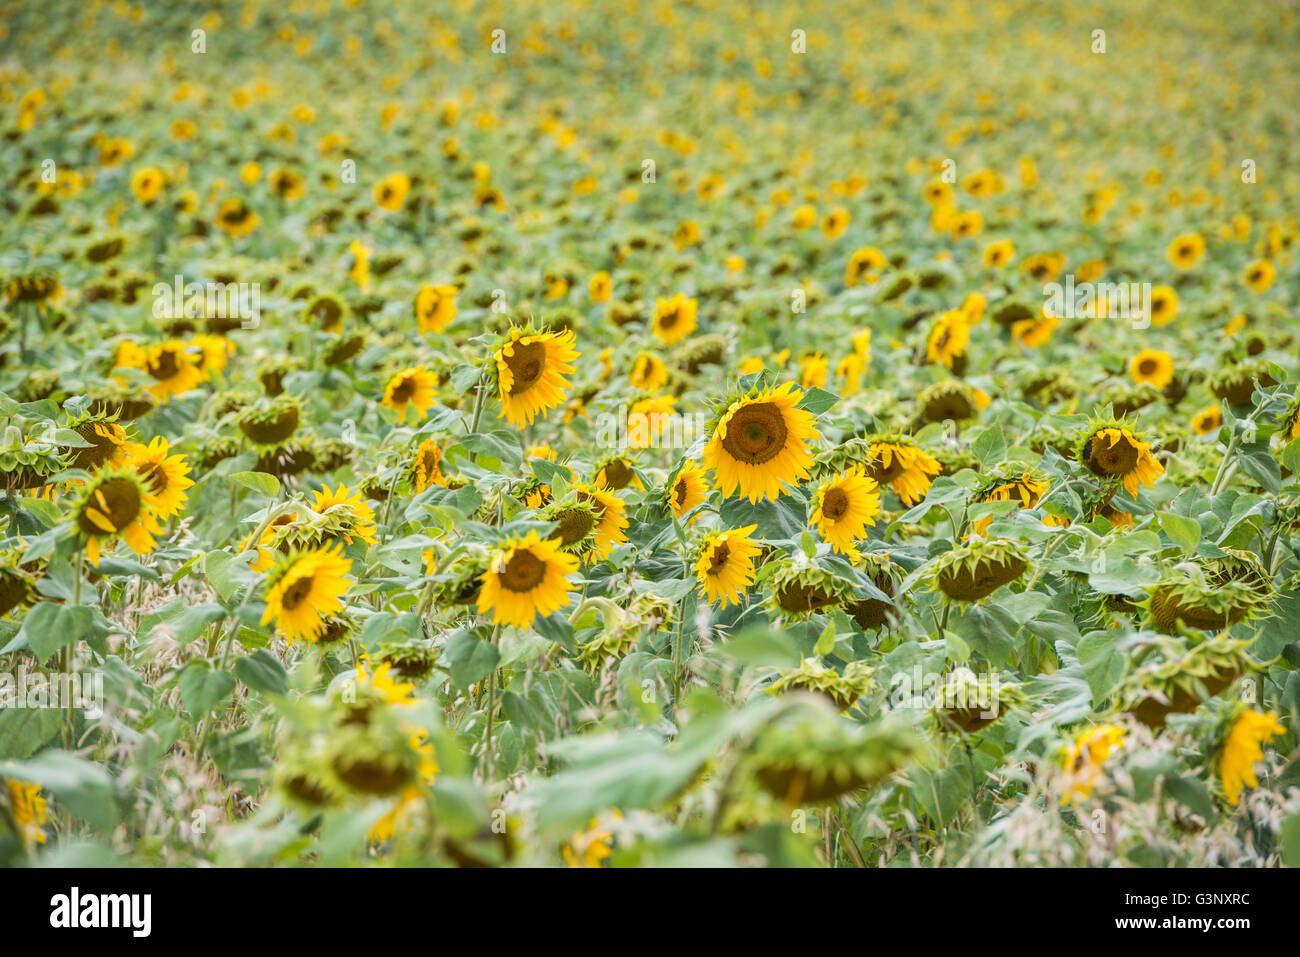 Close up view of a bright yellow sunflower field with opened flowers Stock Photo